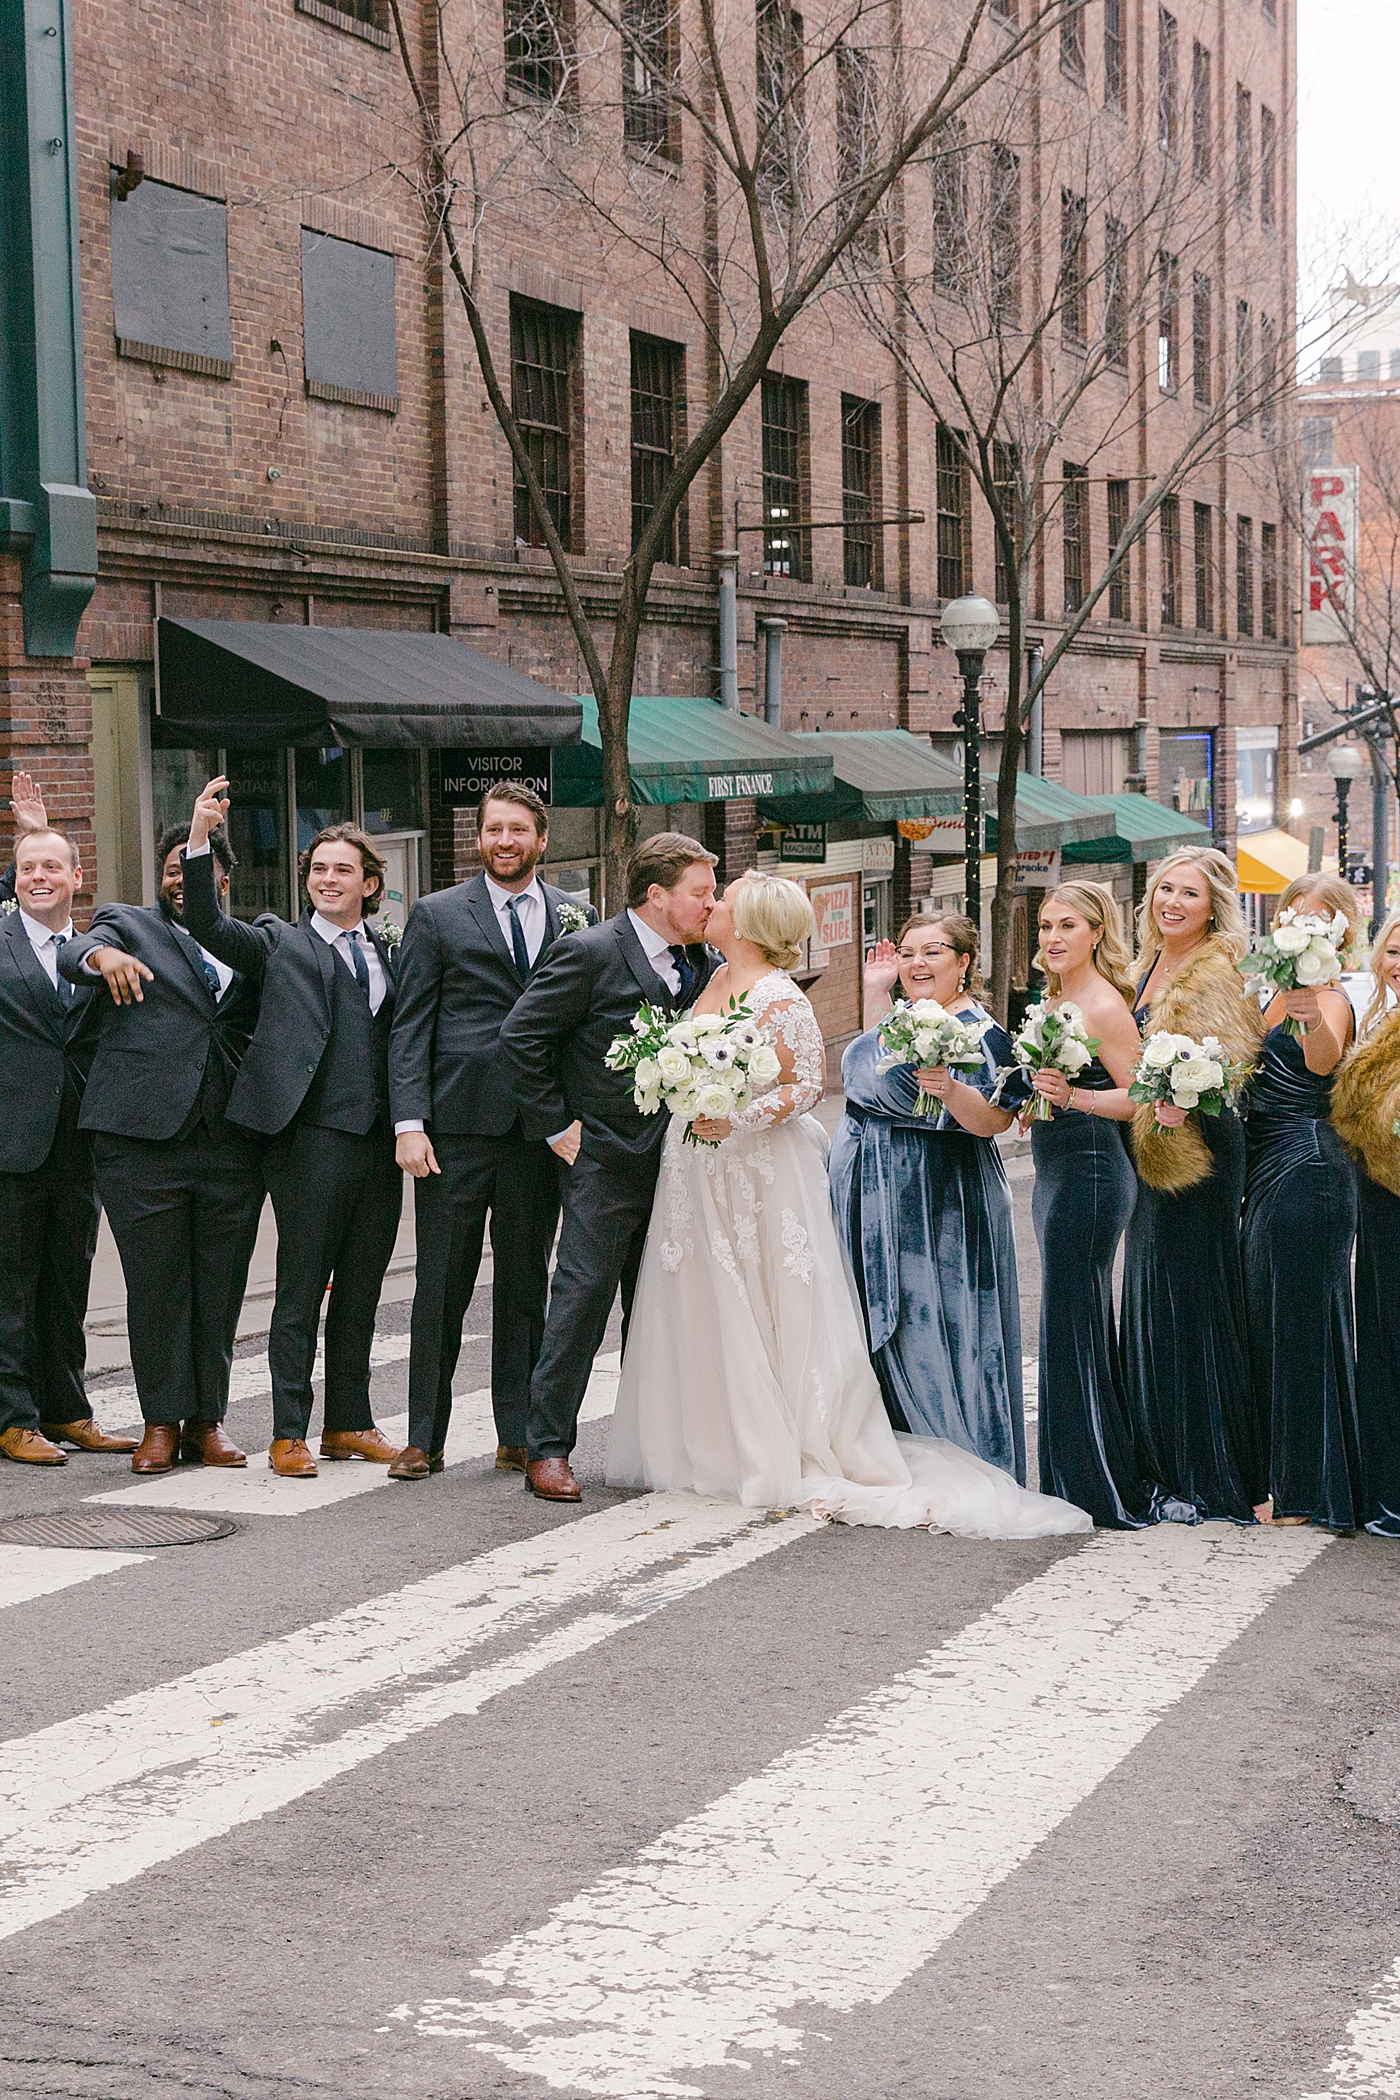 Wedding party photos at Printers Alley | Photo by Hope Helmuth Photography